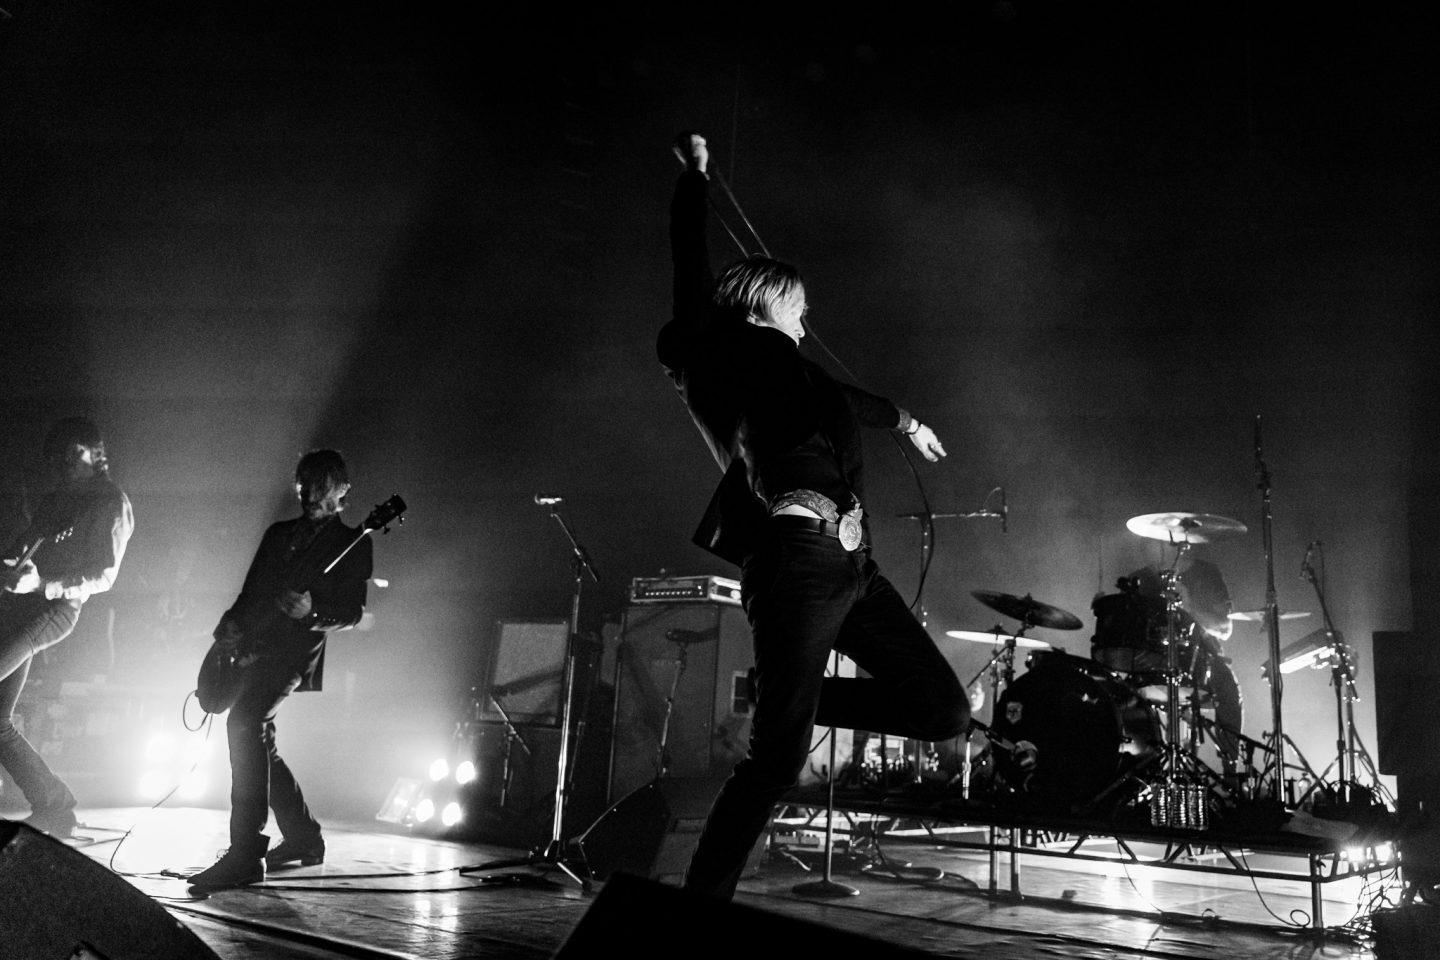 Refused at The Vic Theatre by Thomas Bock Photography